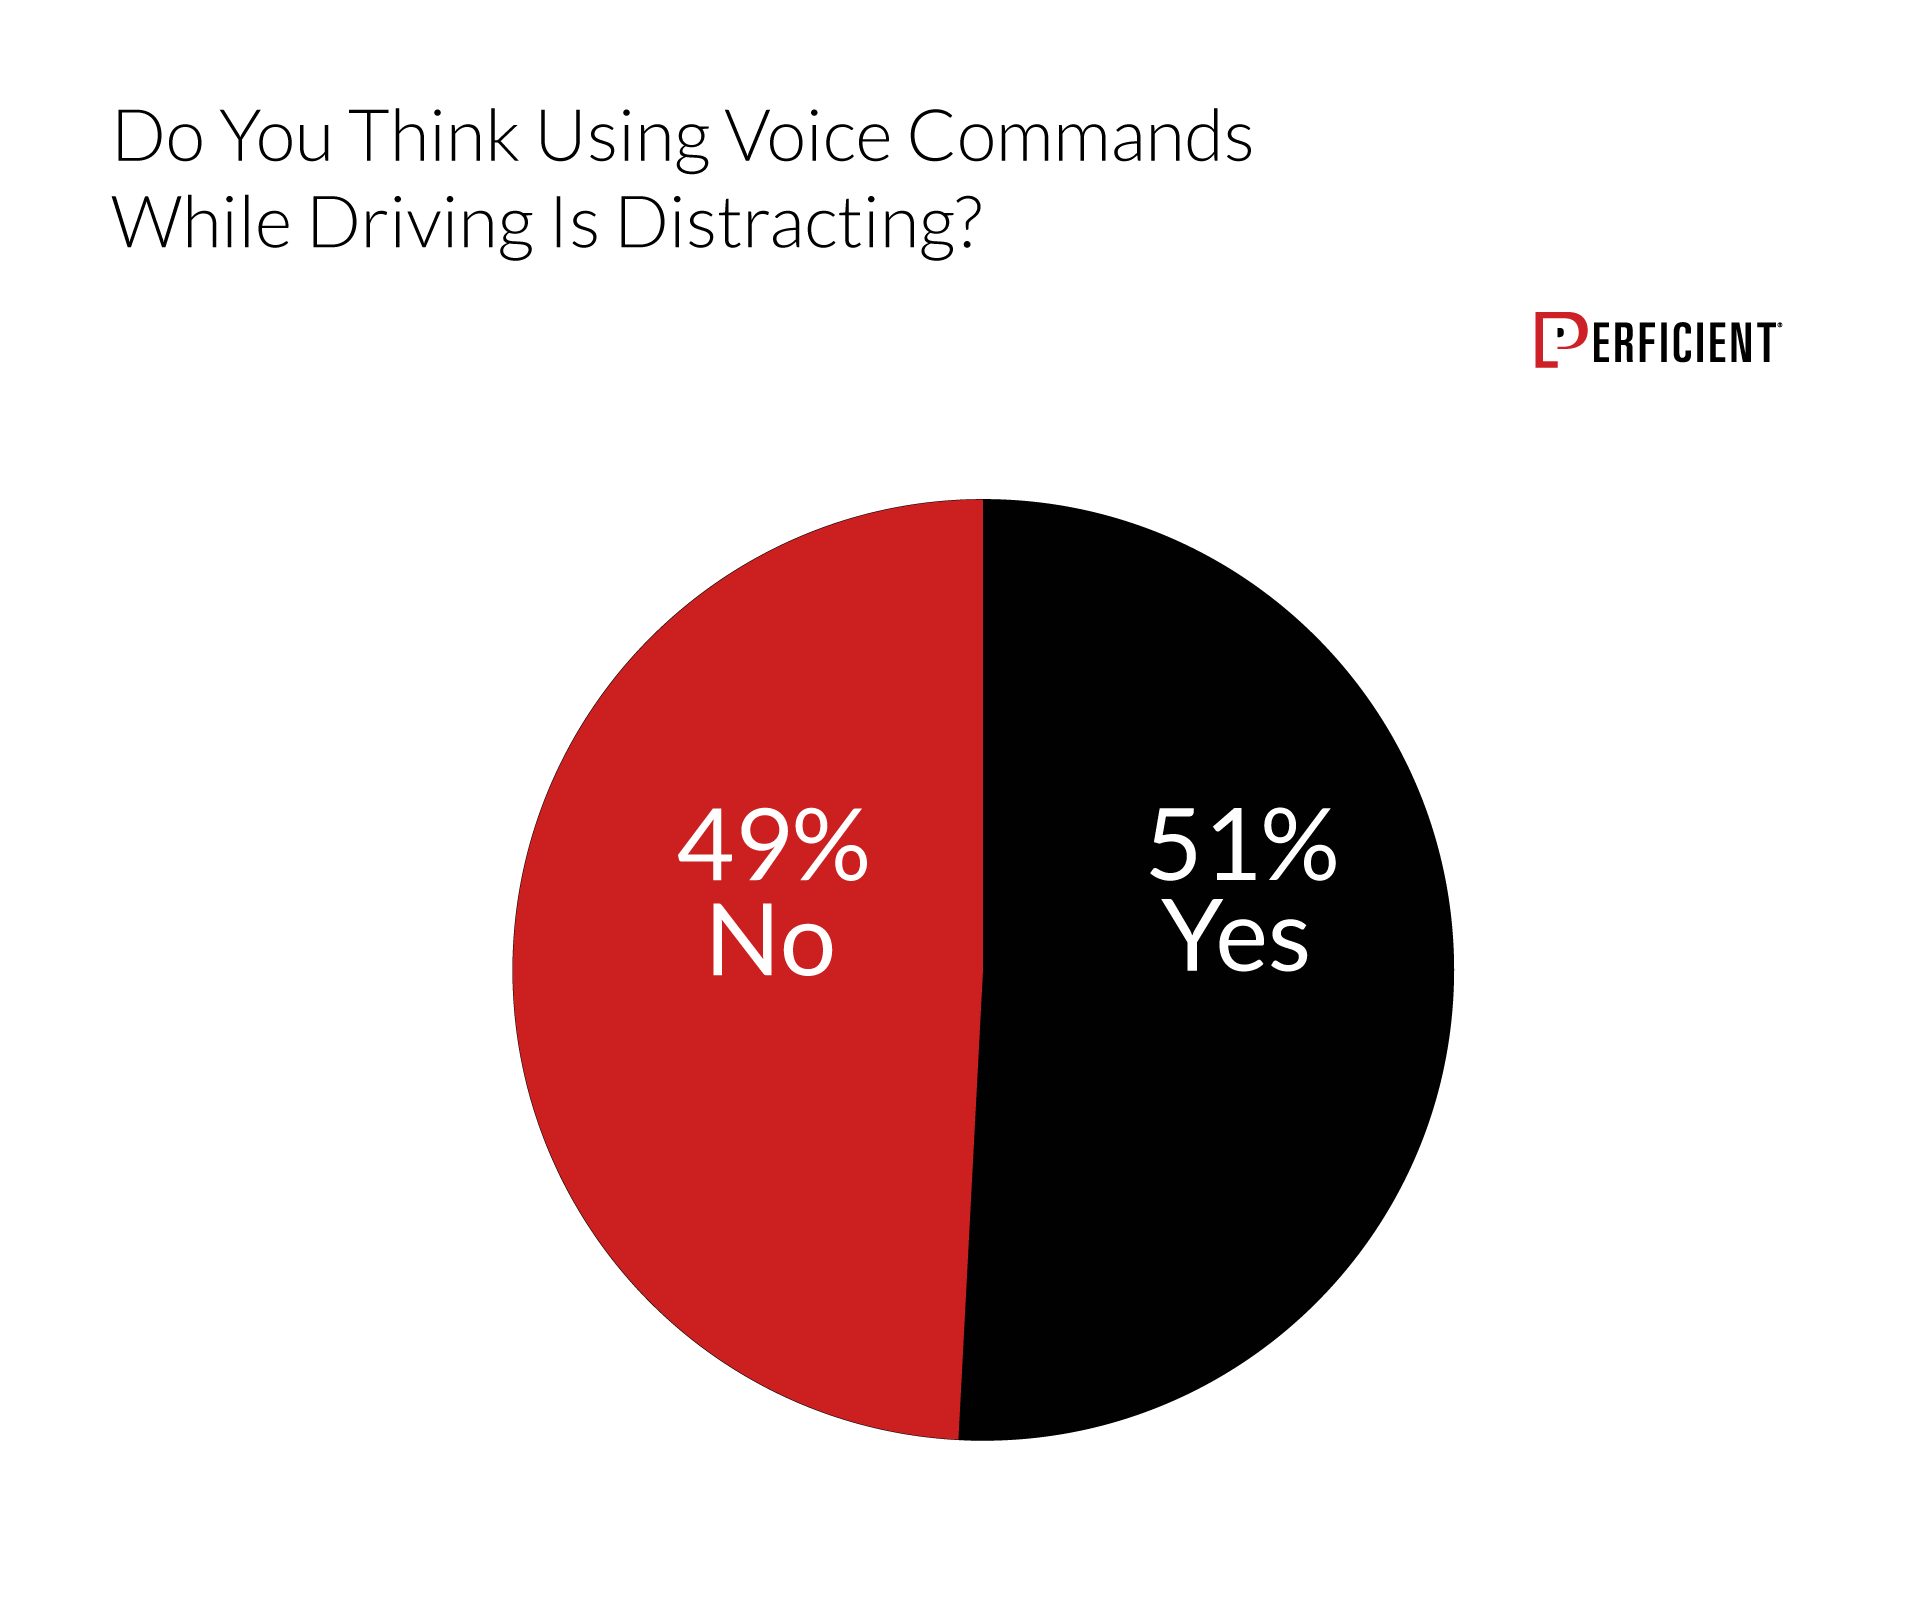 Chart shows if users think using voice commands while driving is distracting